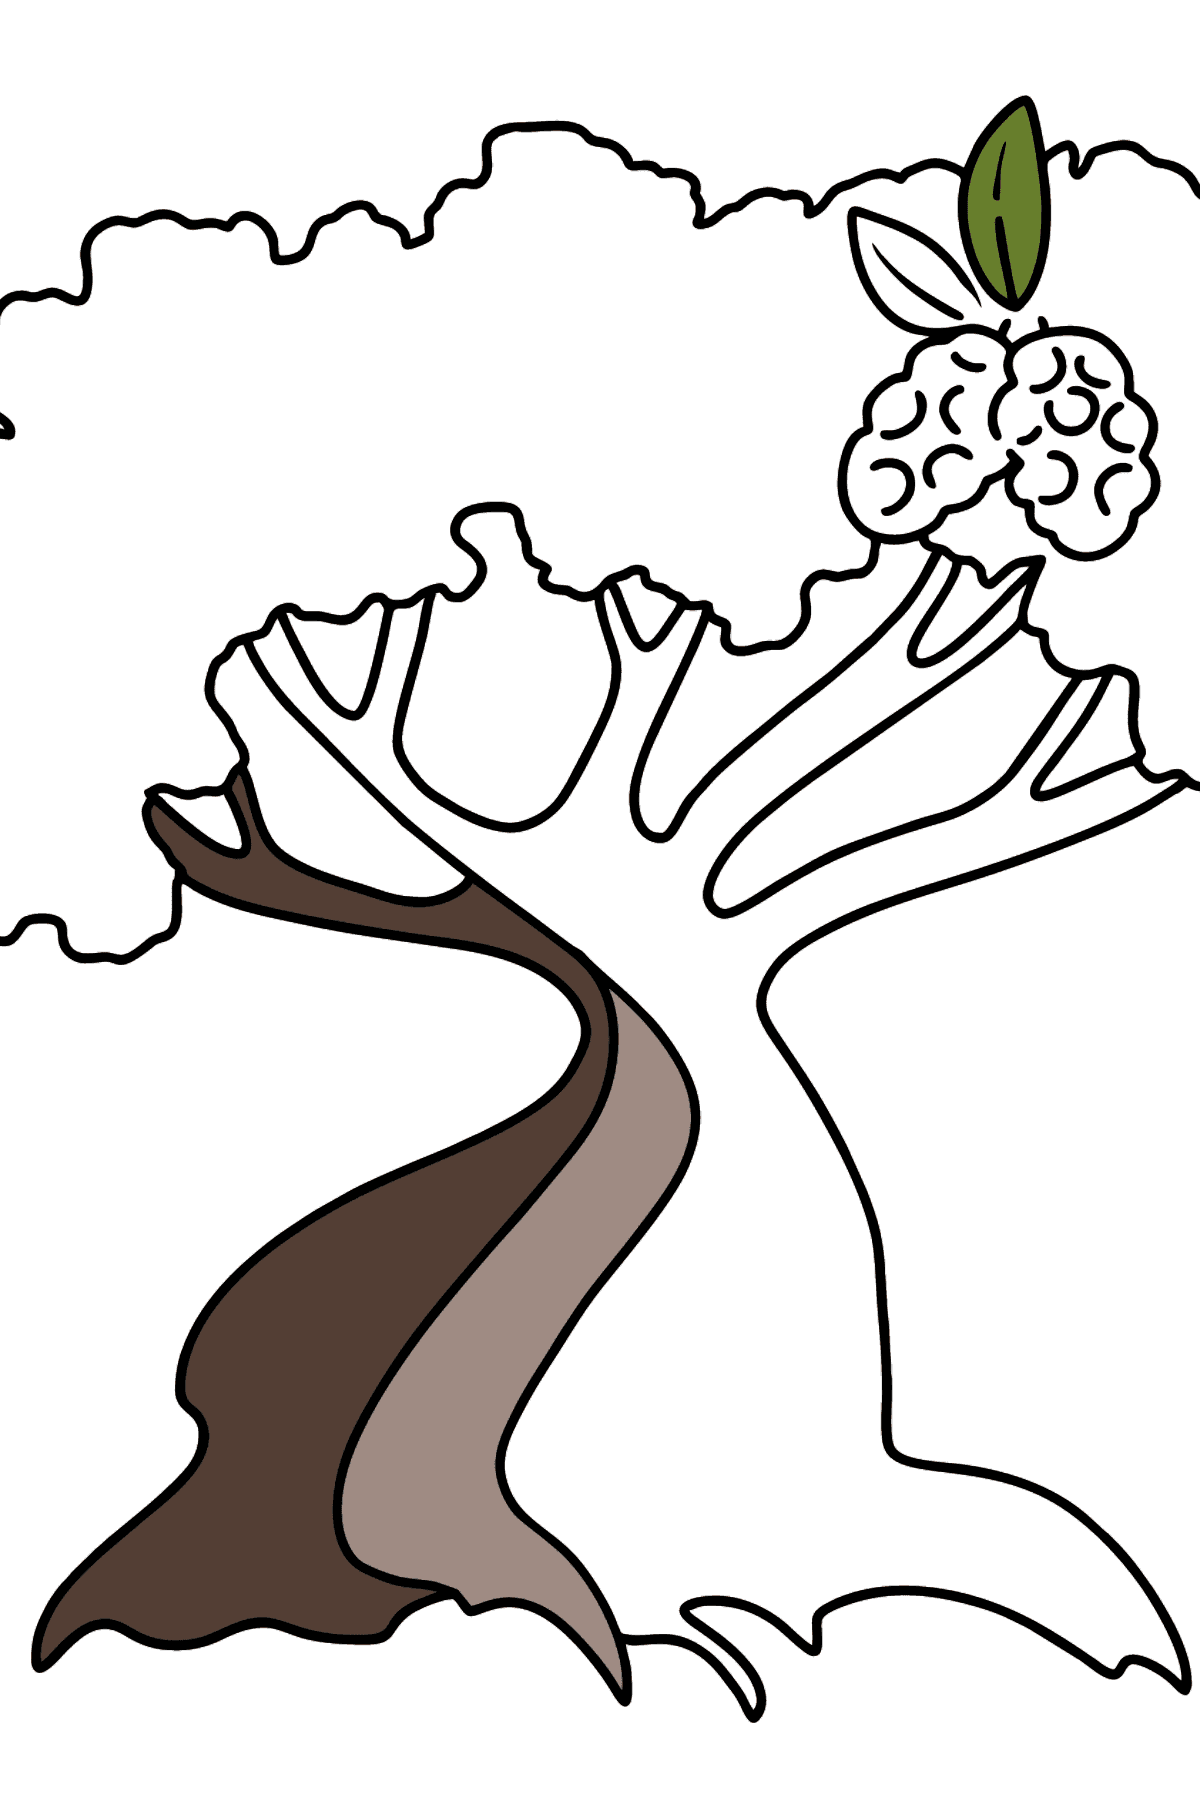 Cotton Tree coloring page - Coloring Pages for Kids